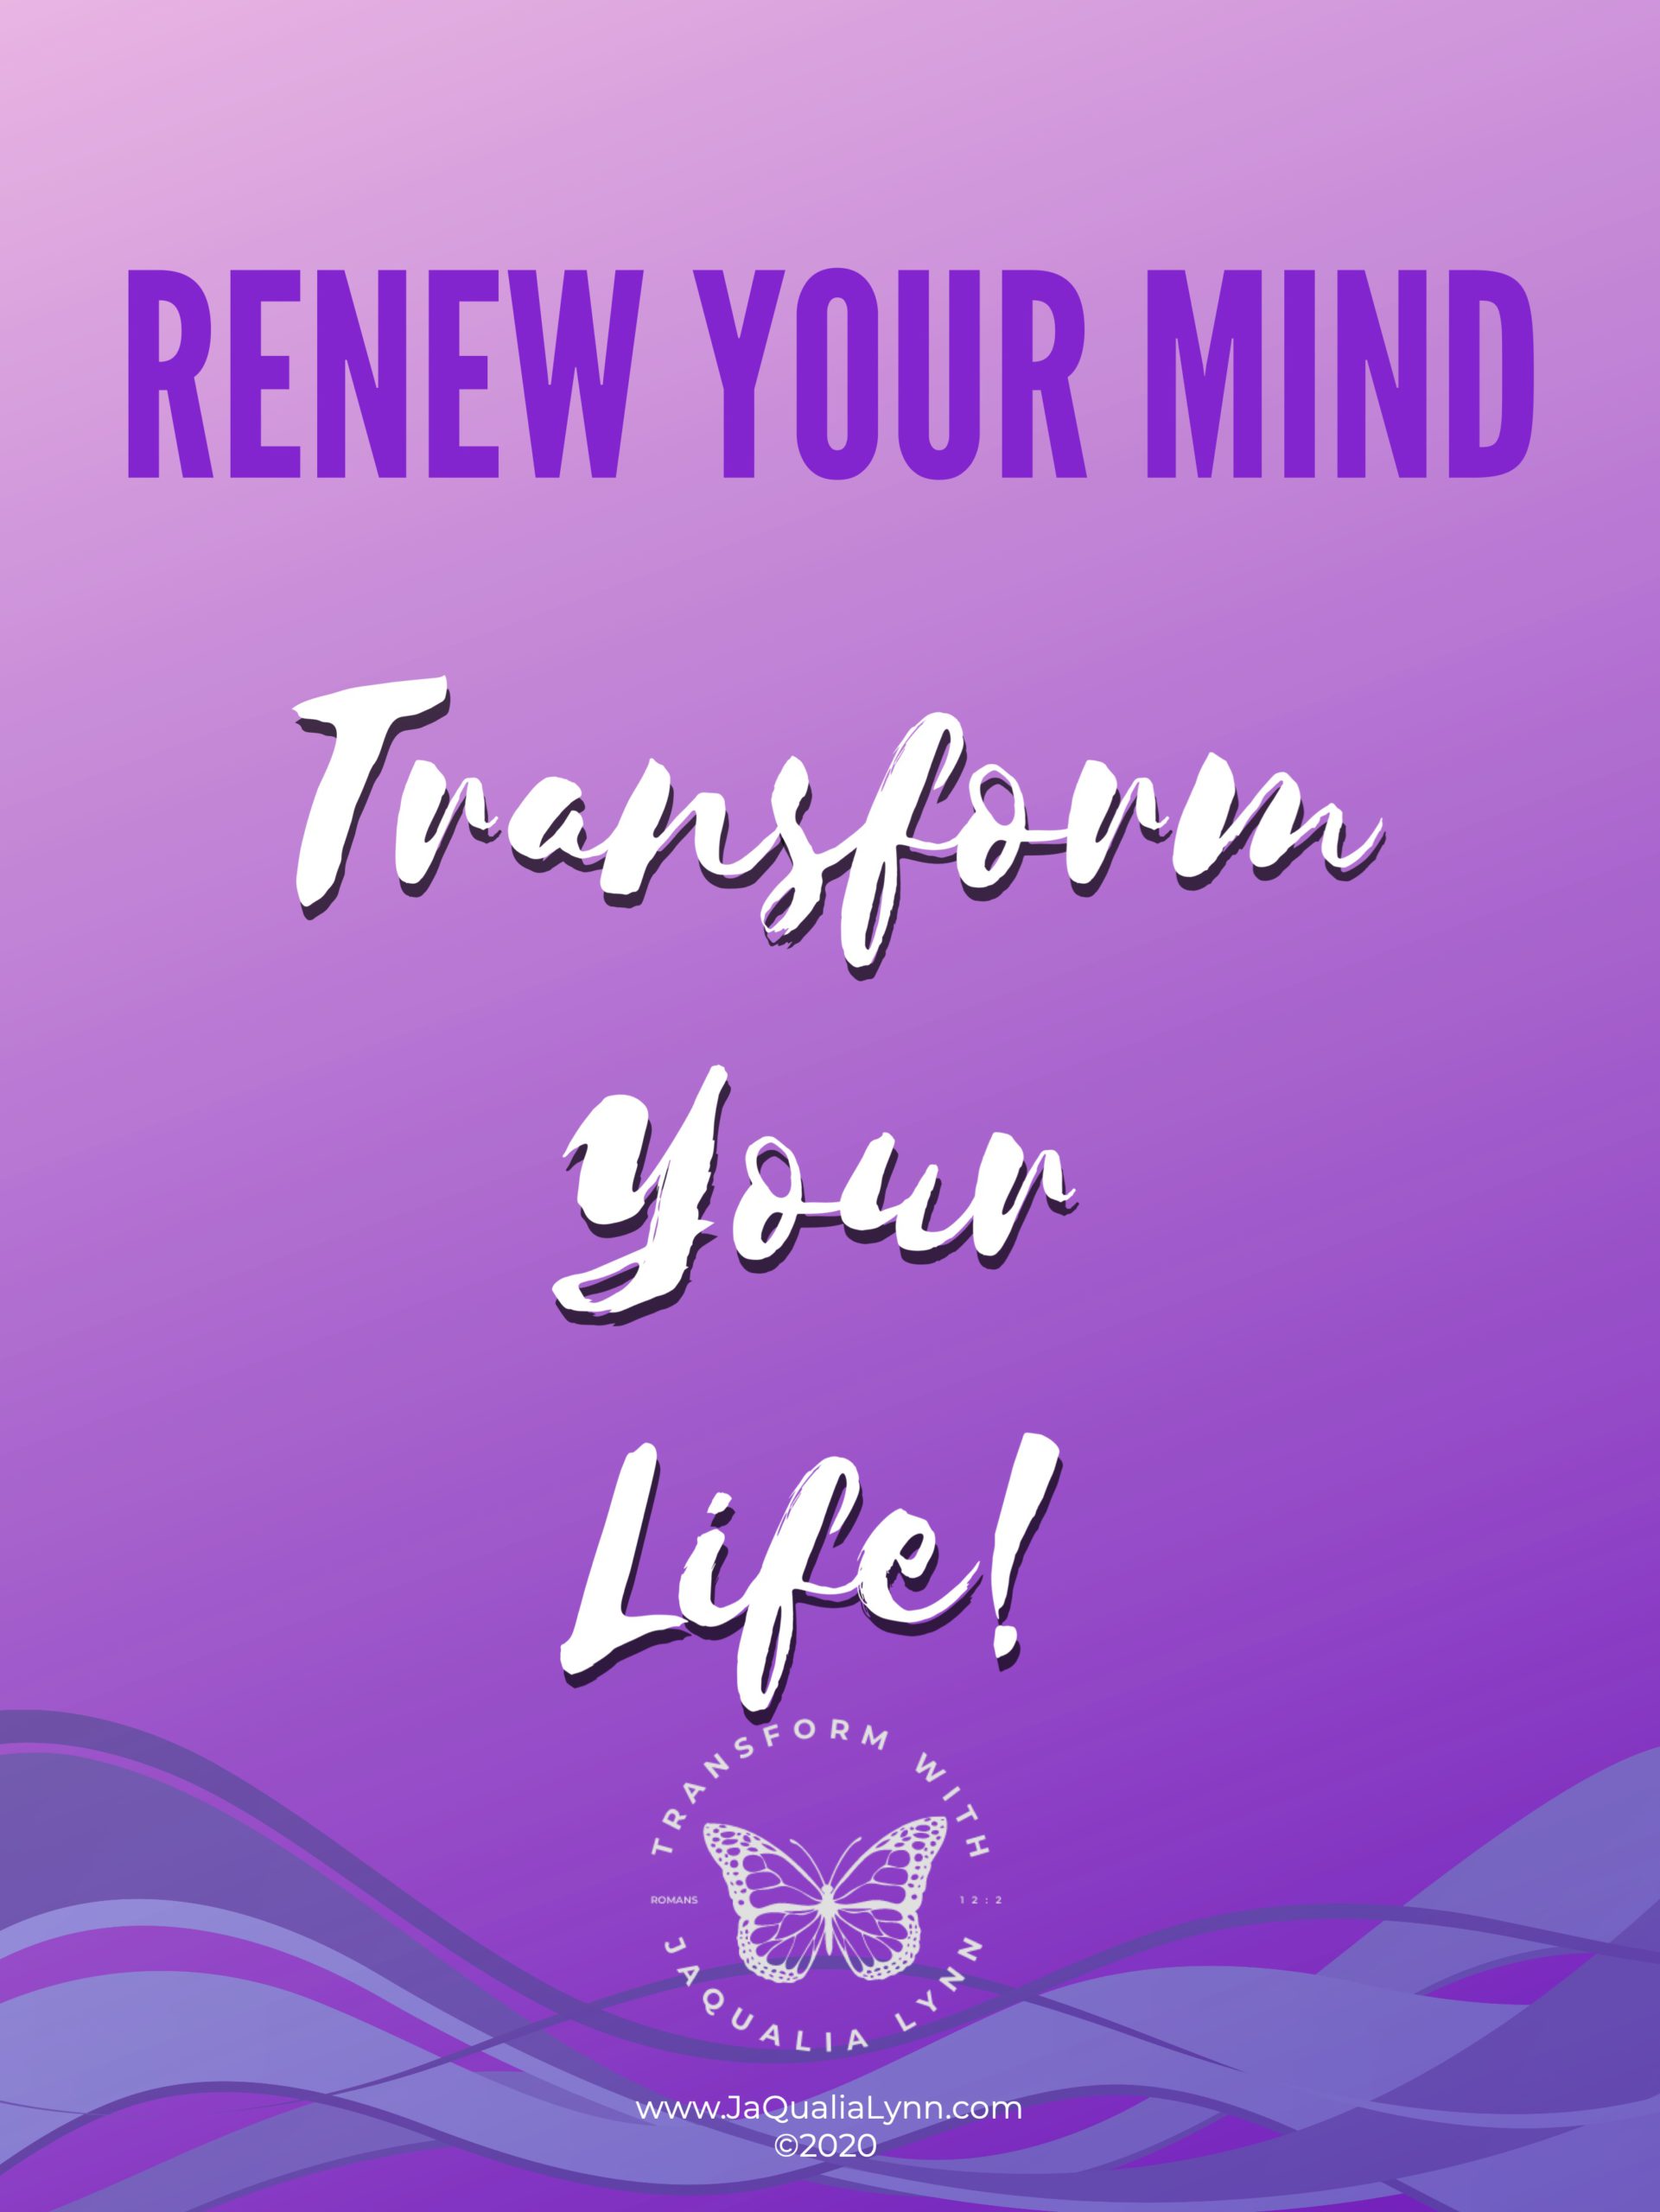 renew your mind poster 18x24 copy